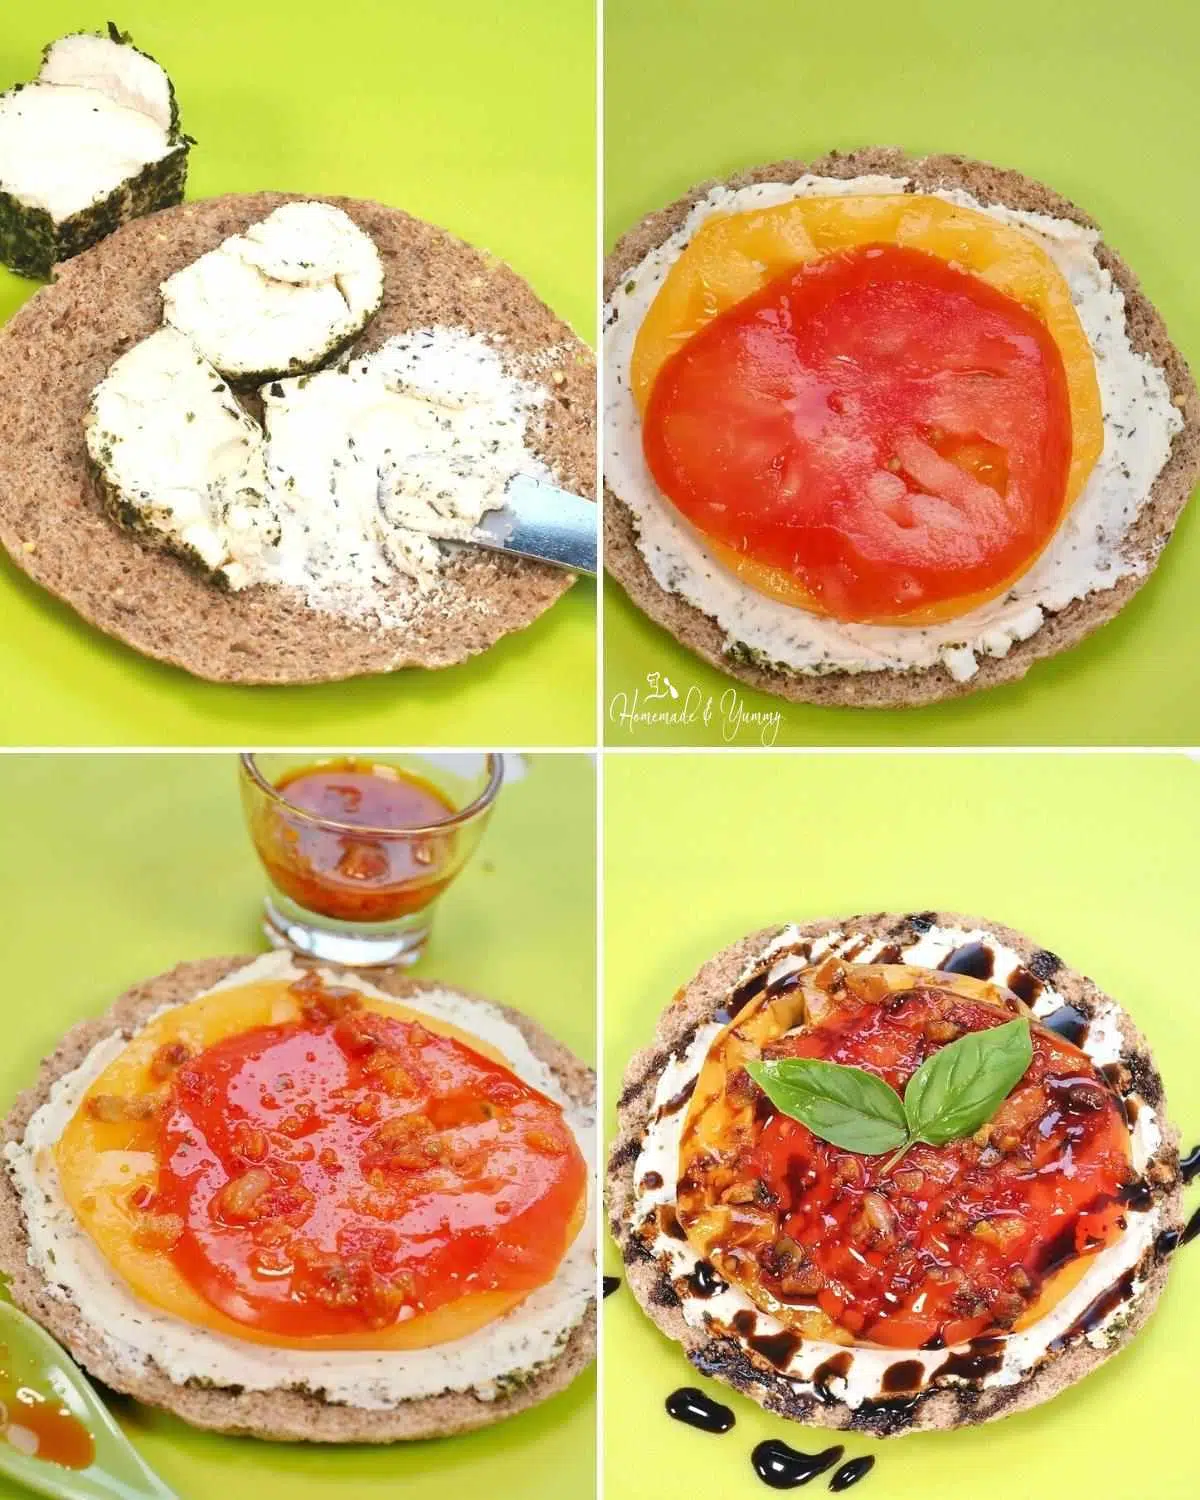 Collage showing steps in making an open sandwich.